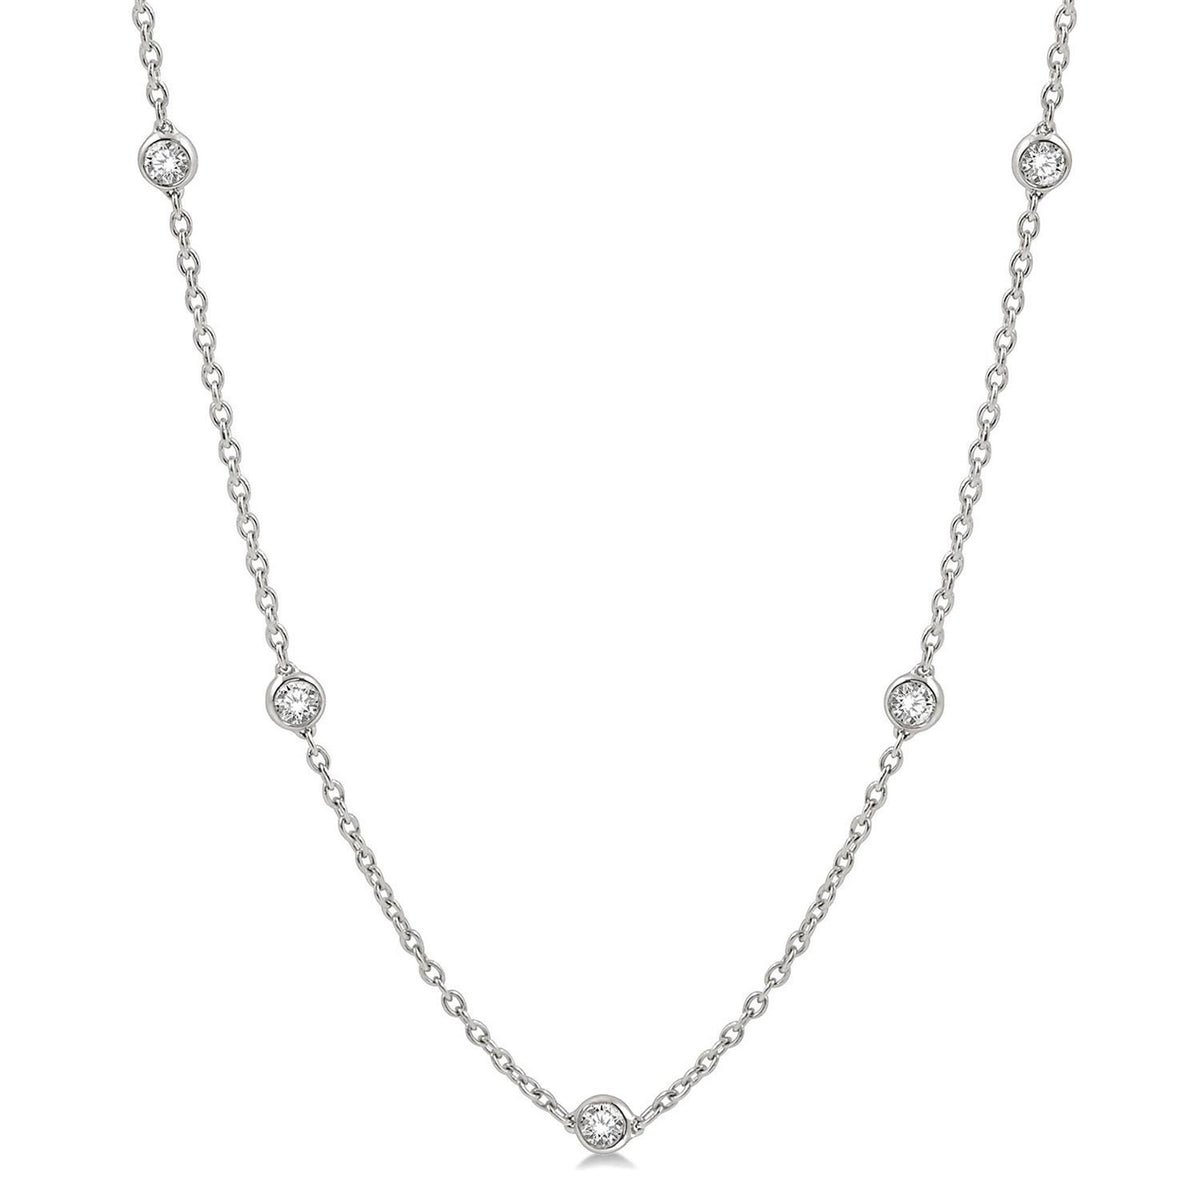 14K White Gold Diamonds By the Yard Milestone Necklace with 2cttw Round Diamonds on 16-18" Chain